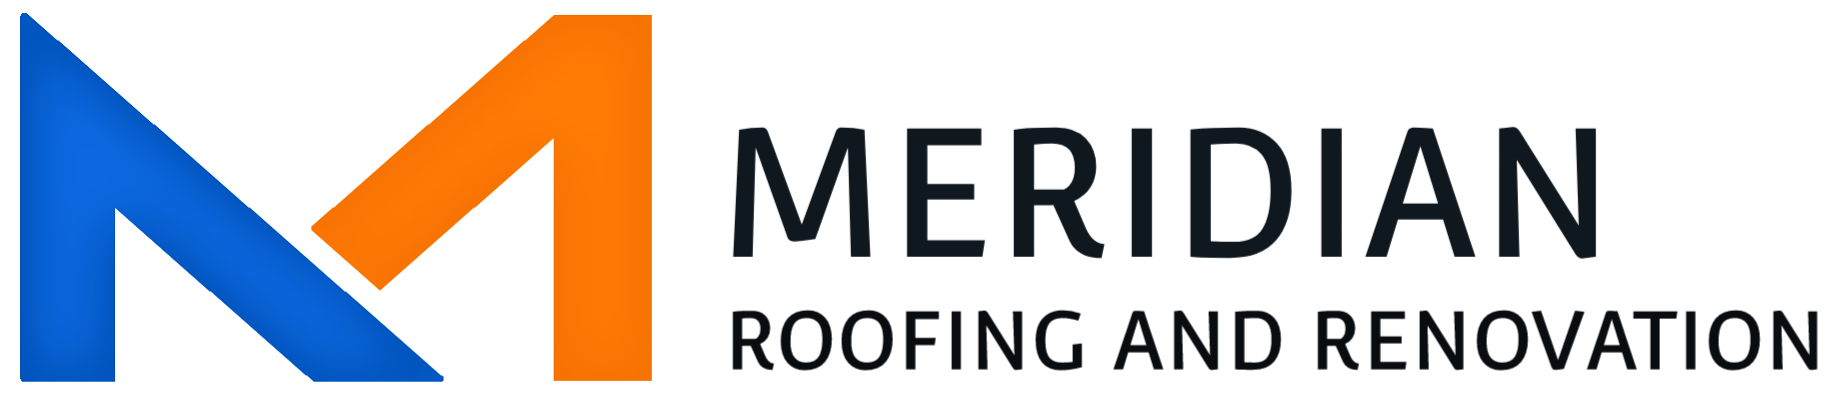 Meridian Roofing and Renovation Logo